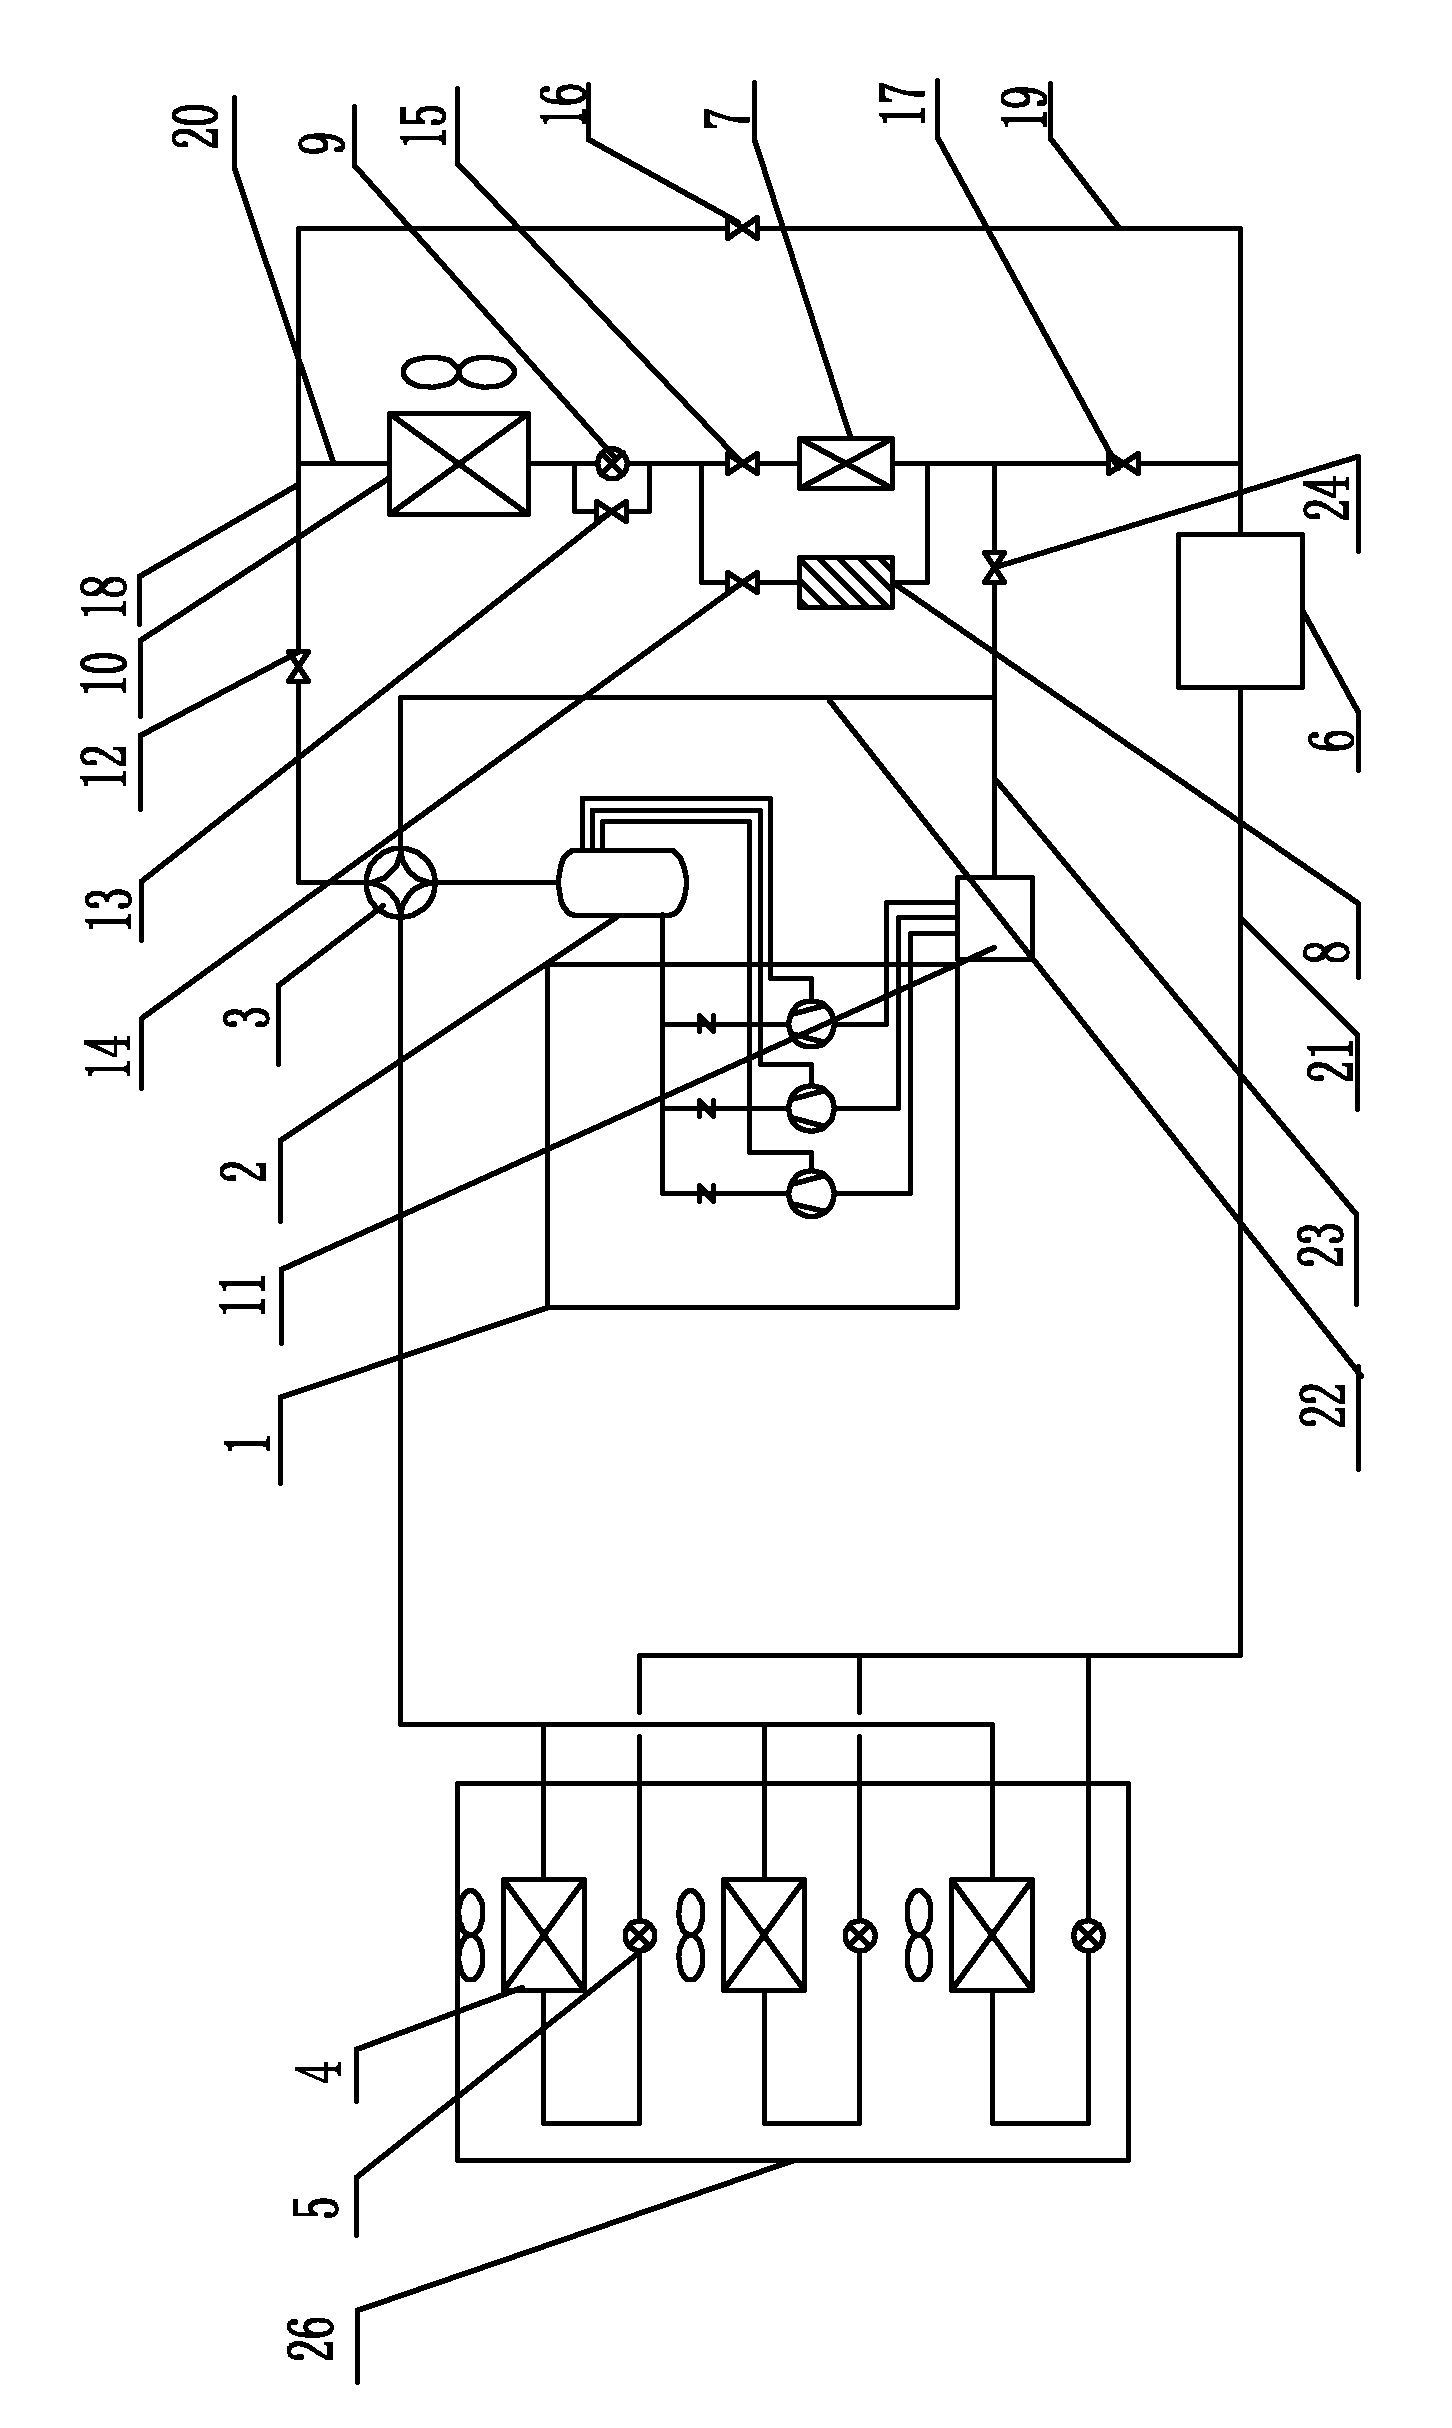 Multi-connected unit phase change energy storage hot liquid defrosting system